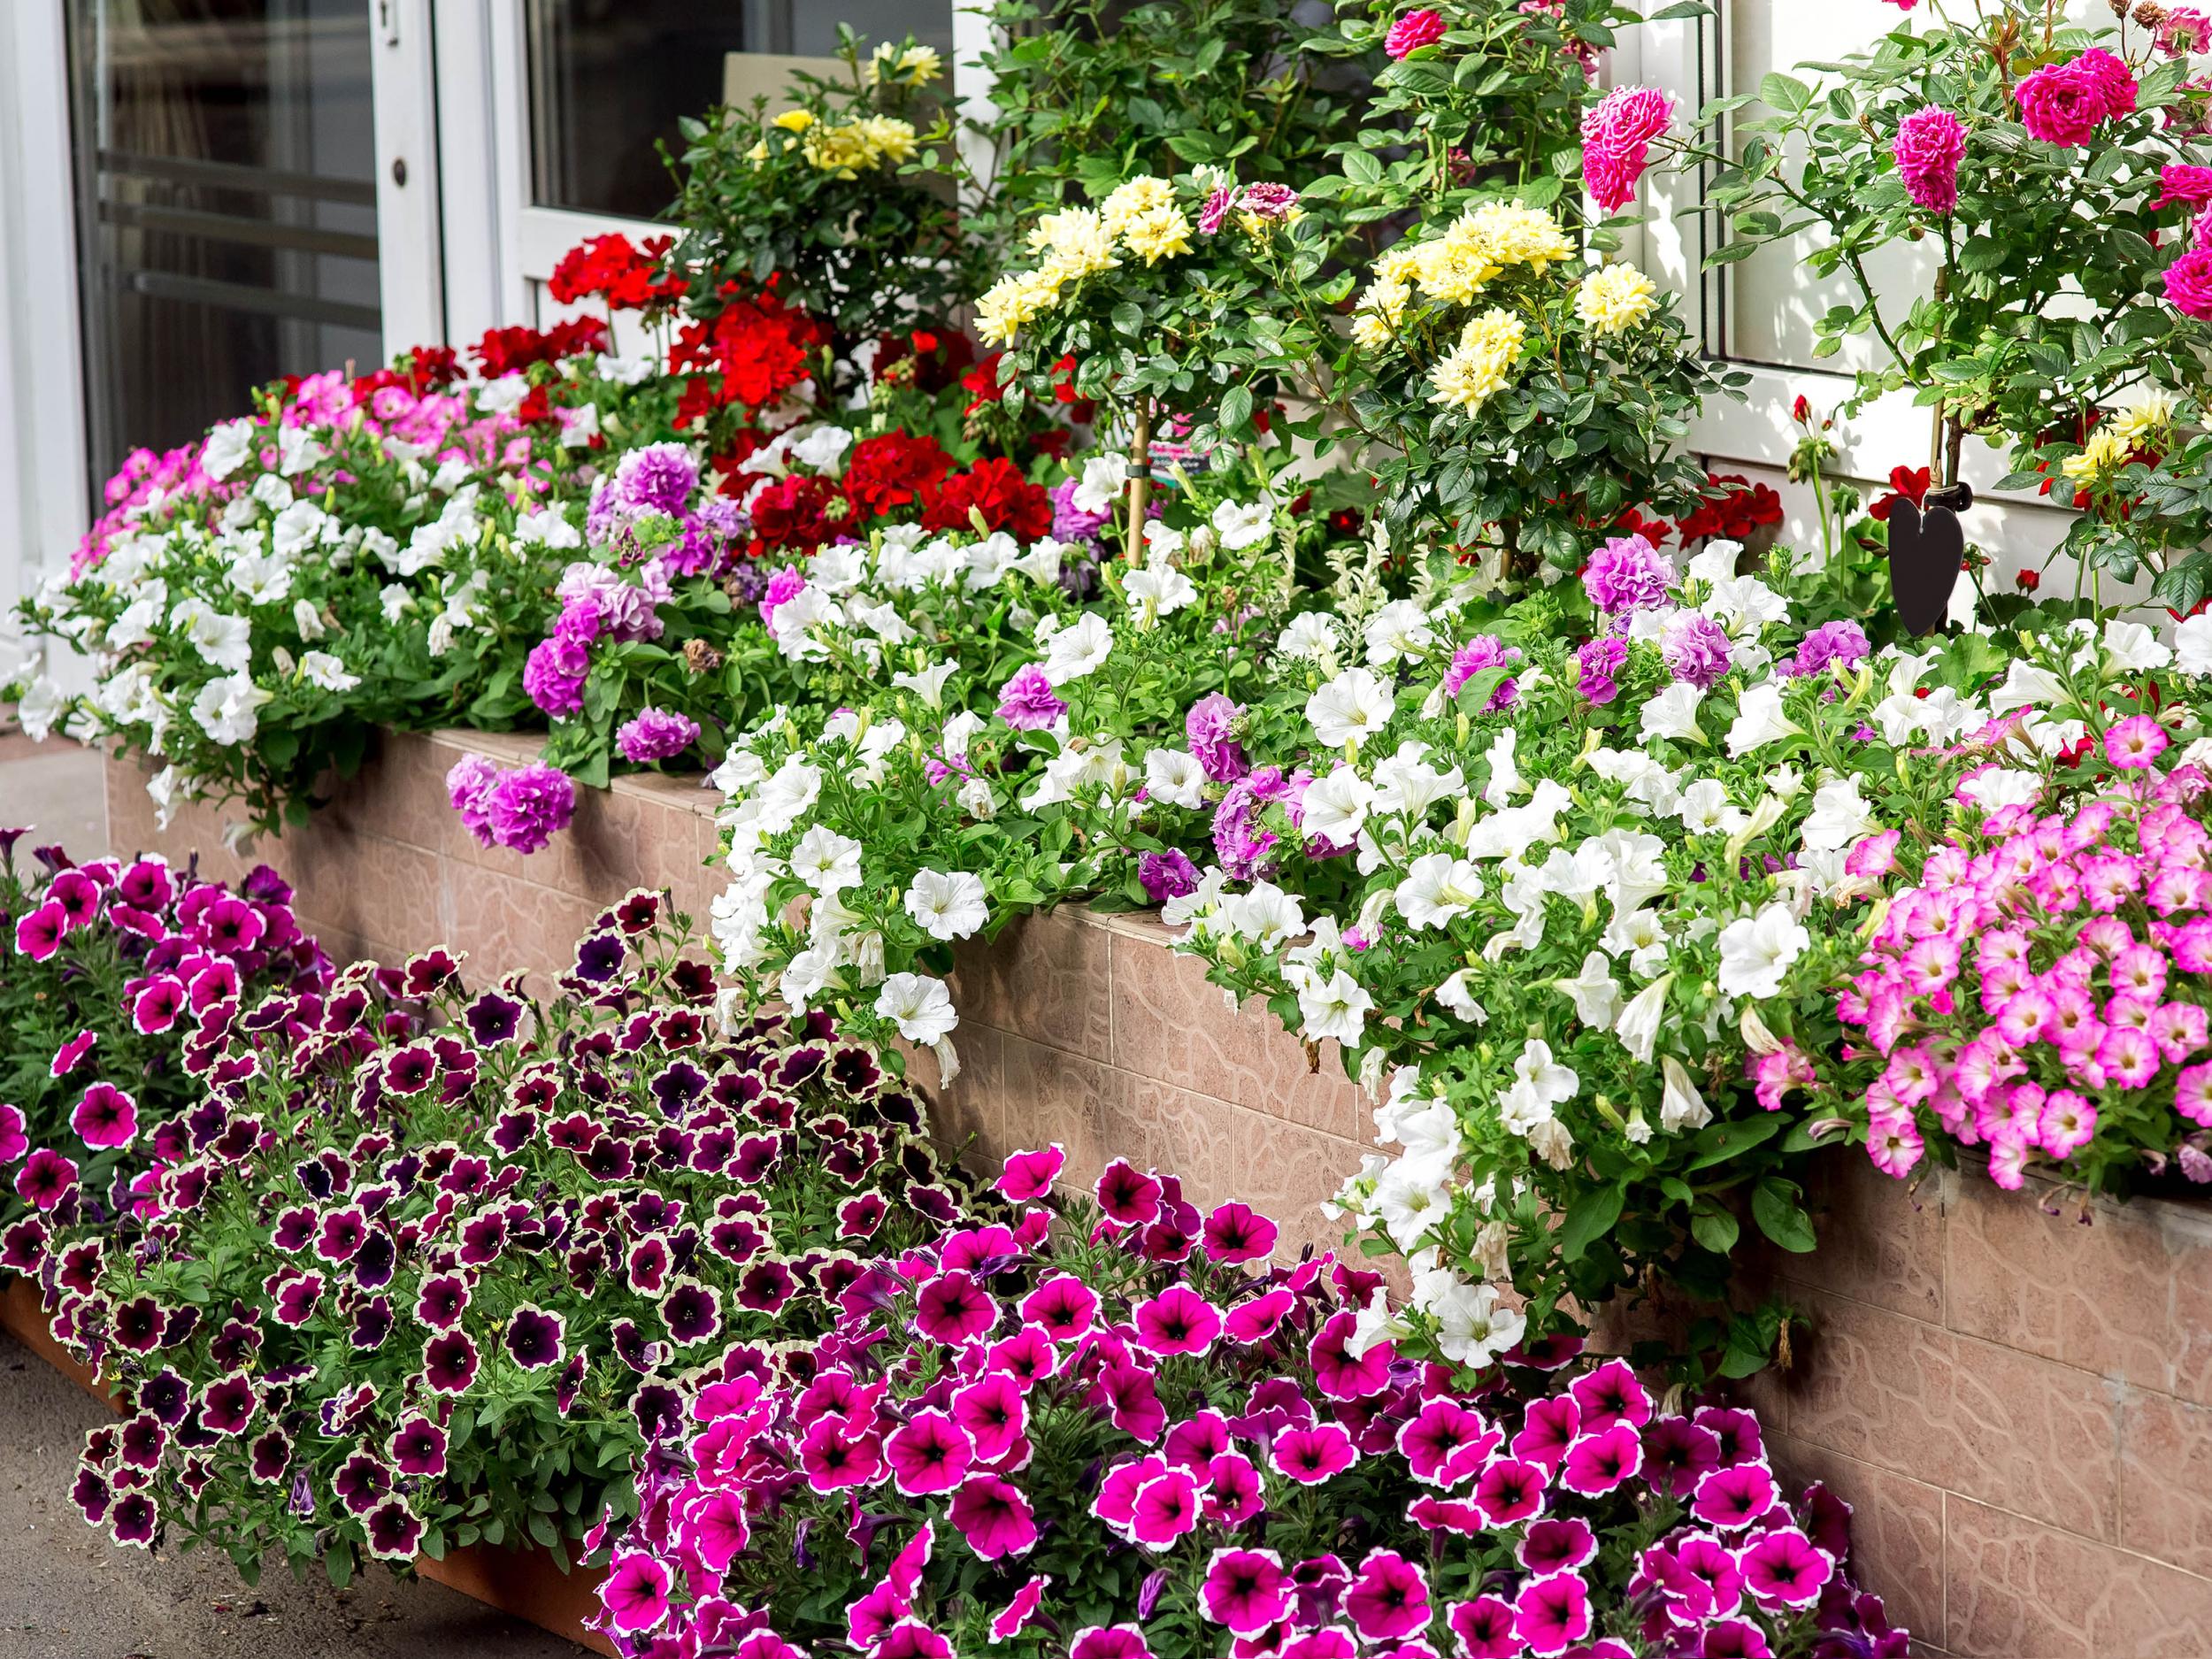 Petunias can be planted in beds, pots or hanging baskets